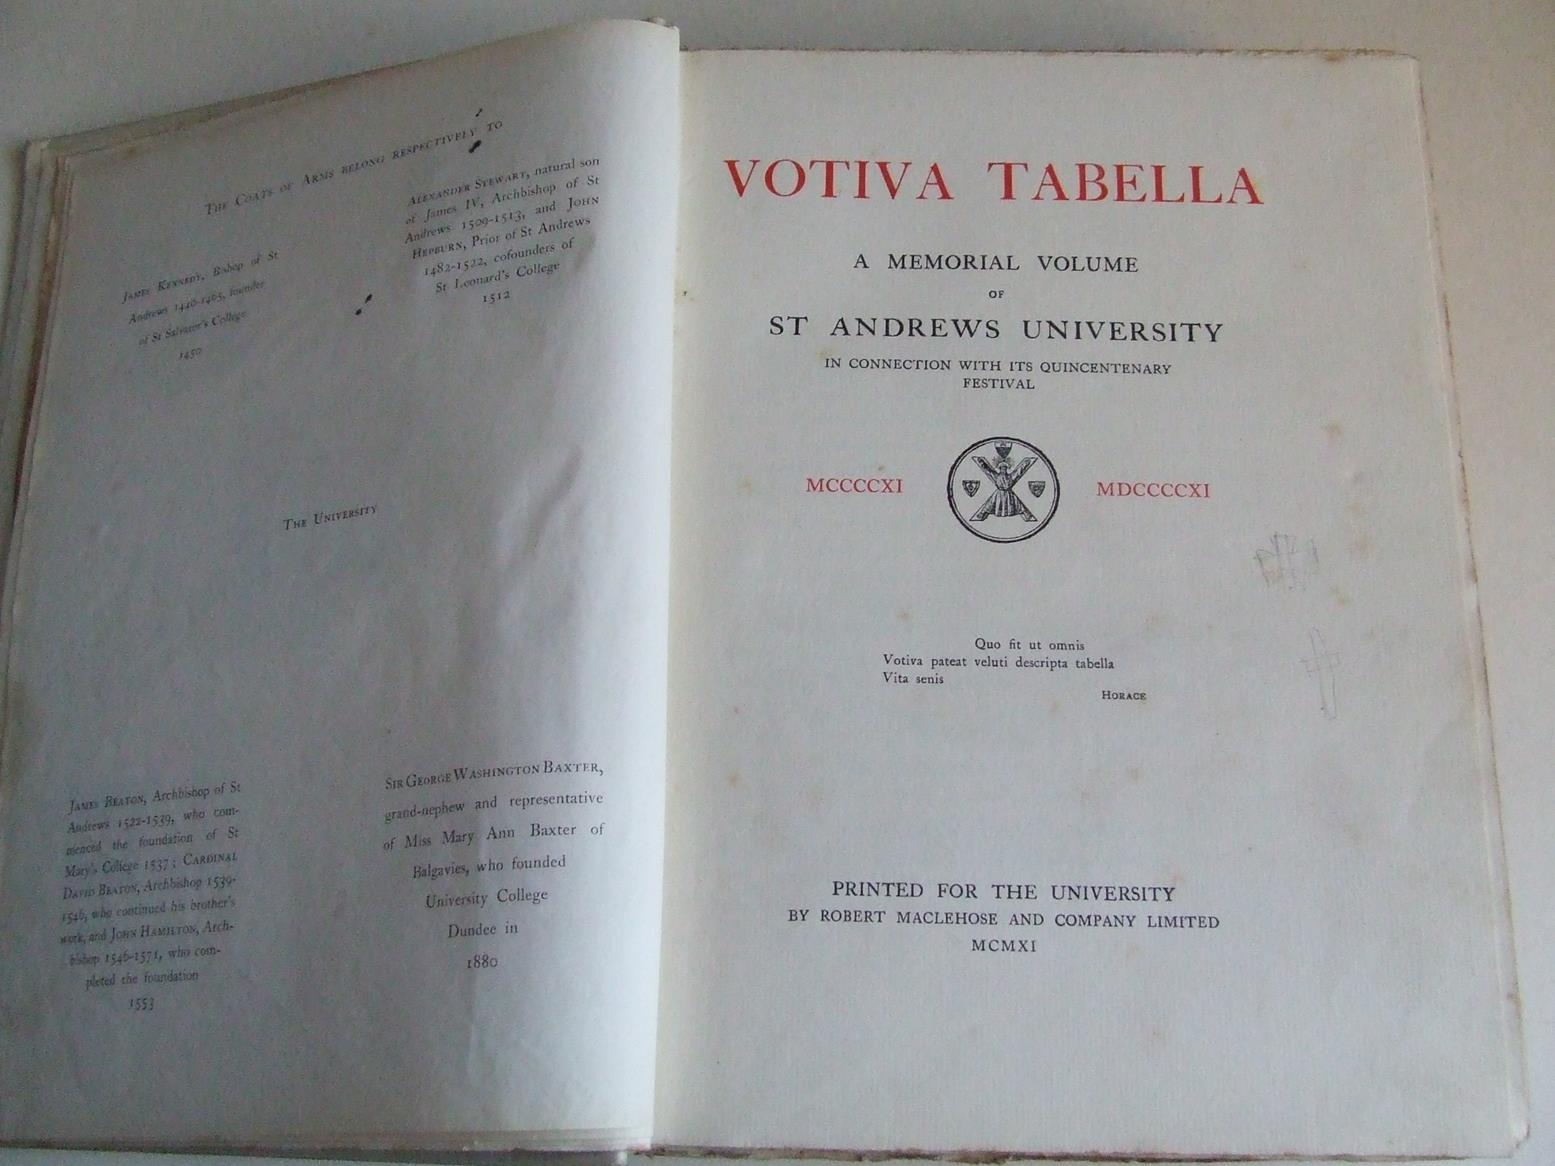 Votiva Tabella. a memorial volume of St.Andrews University in connection with its quincentenary festival, 1411-1911